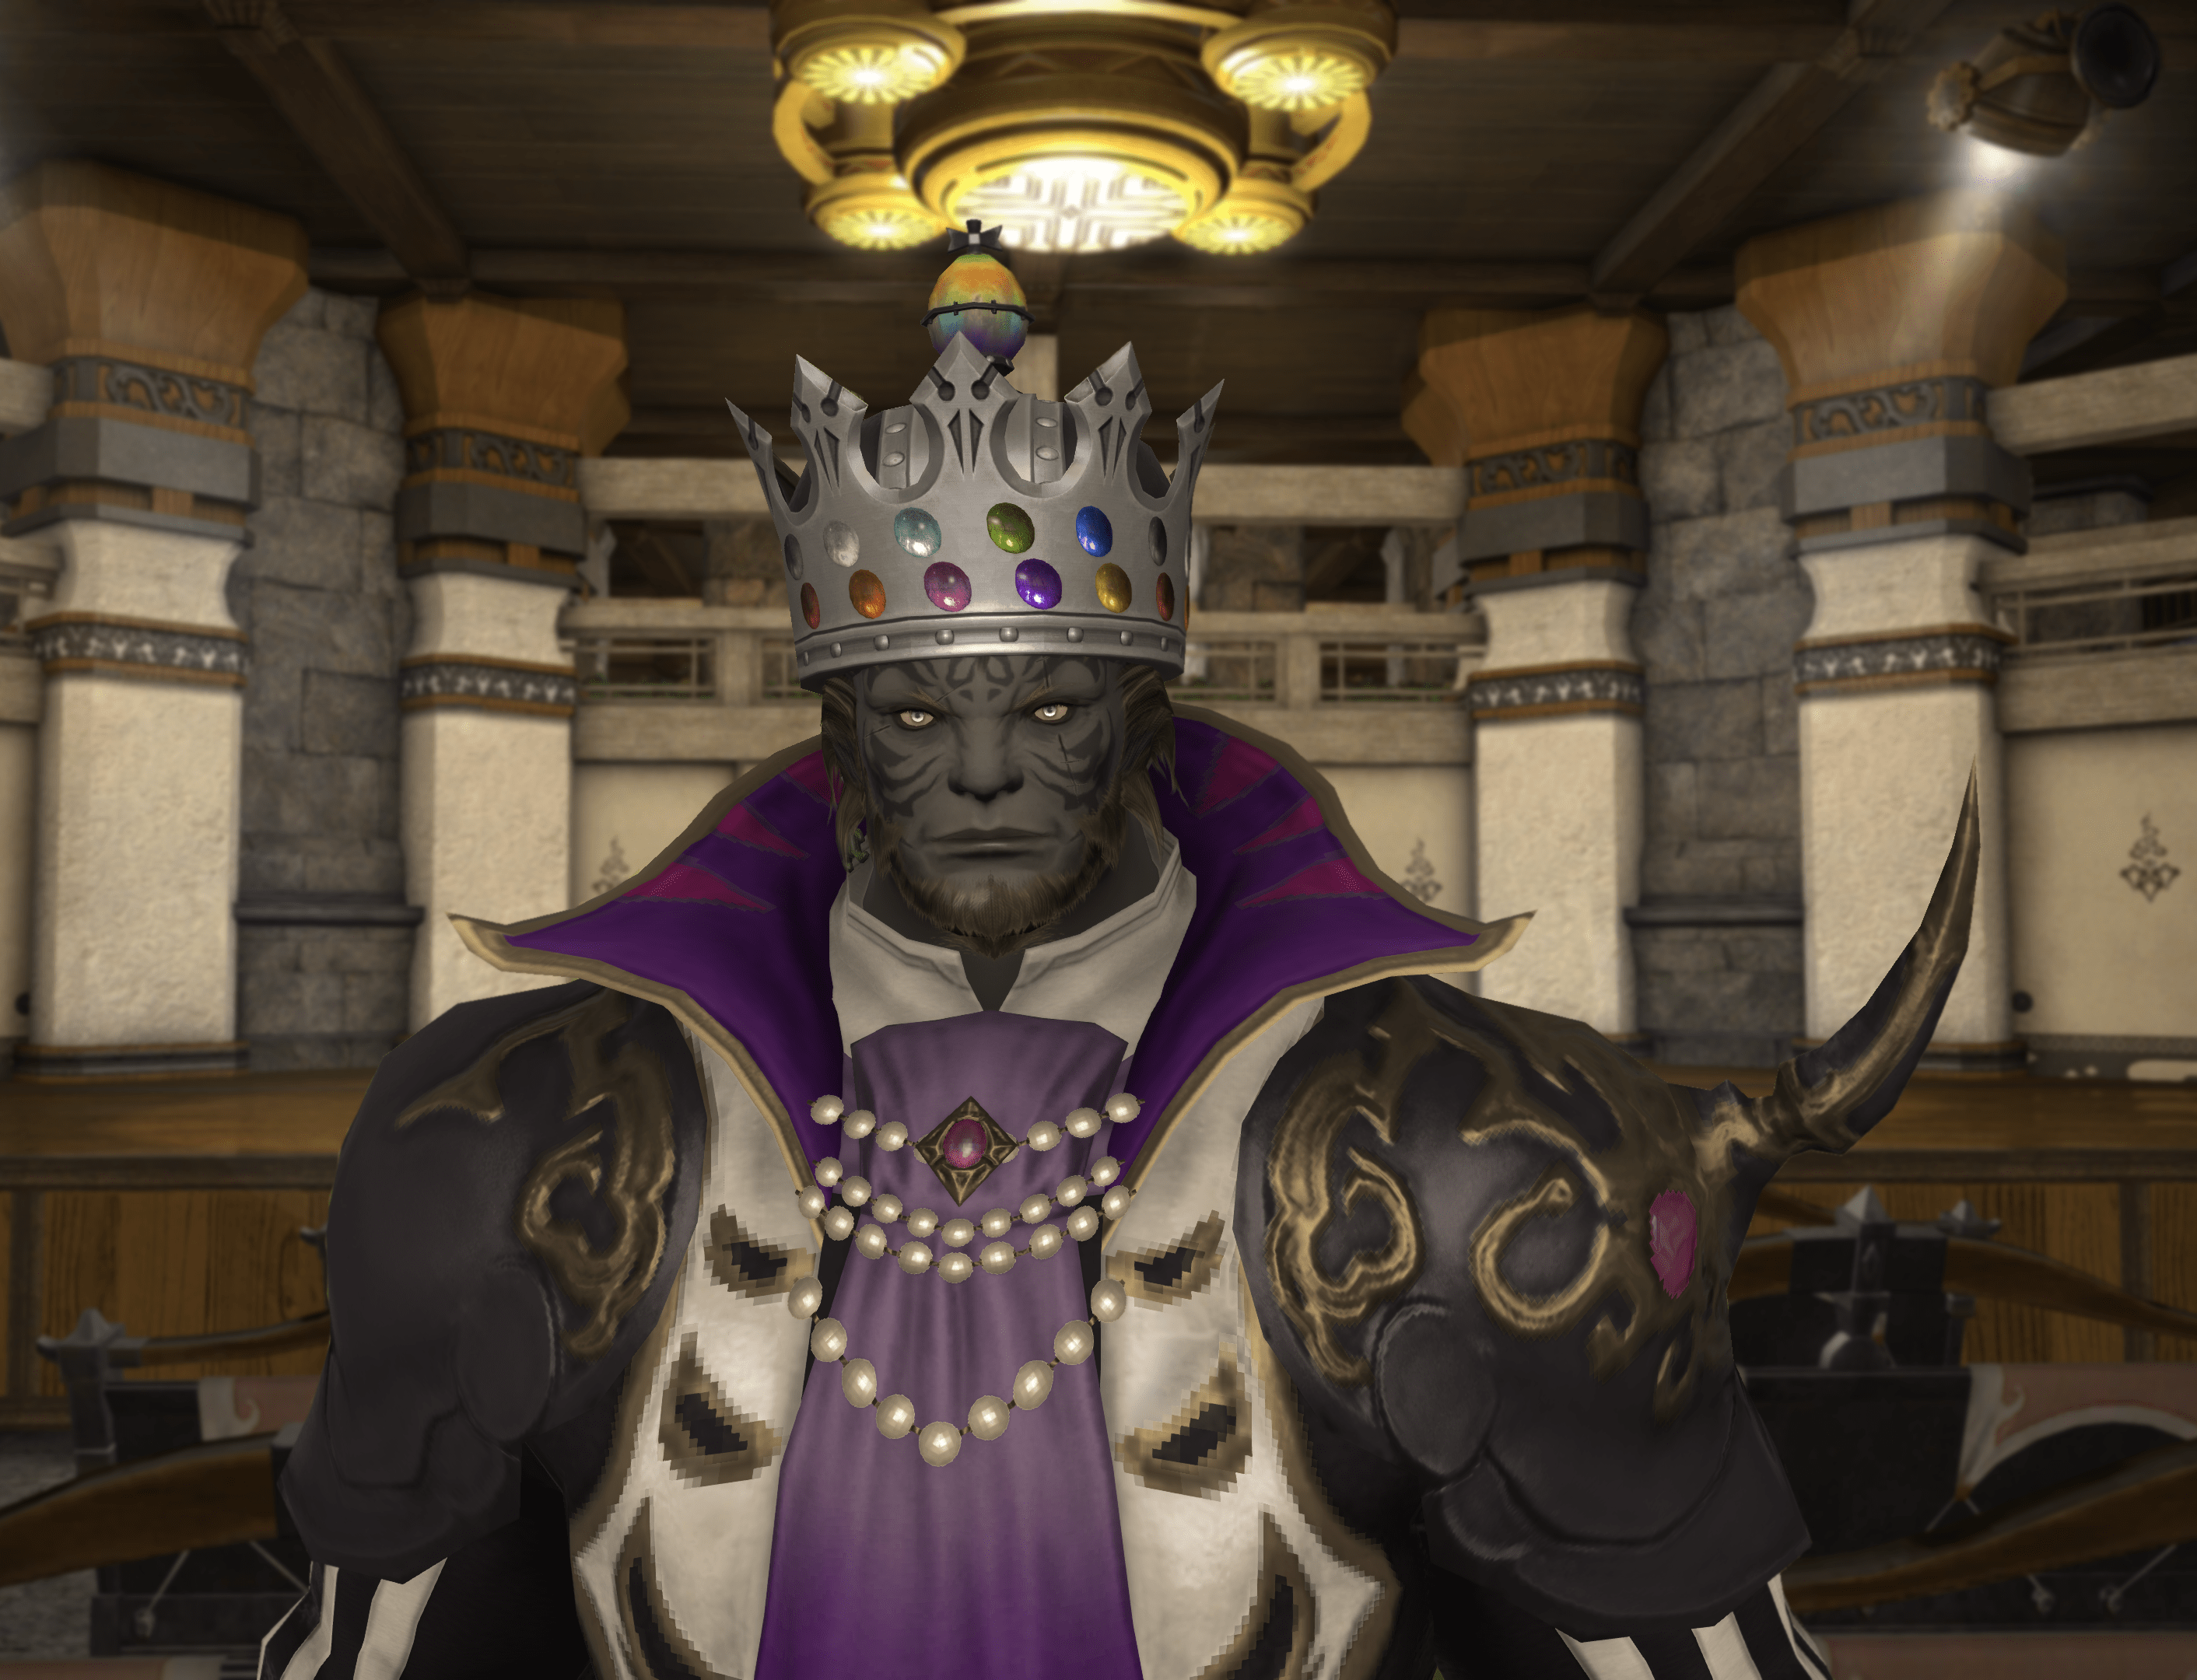 Final Fantasy 14 Players Created Their Own In-Game Theatre Troupe